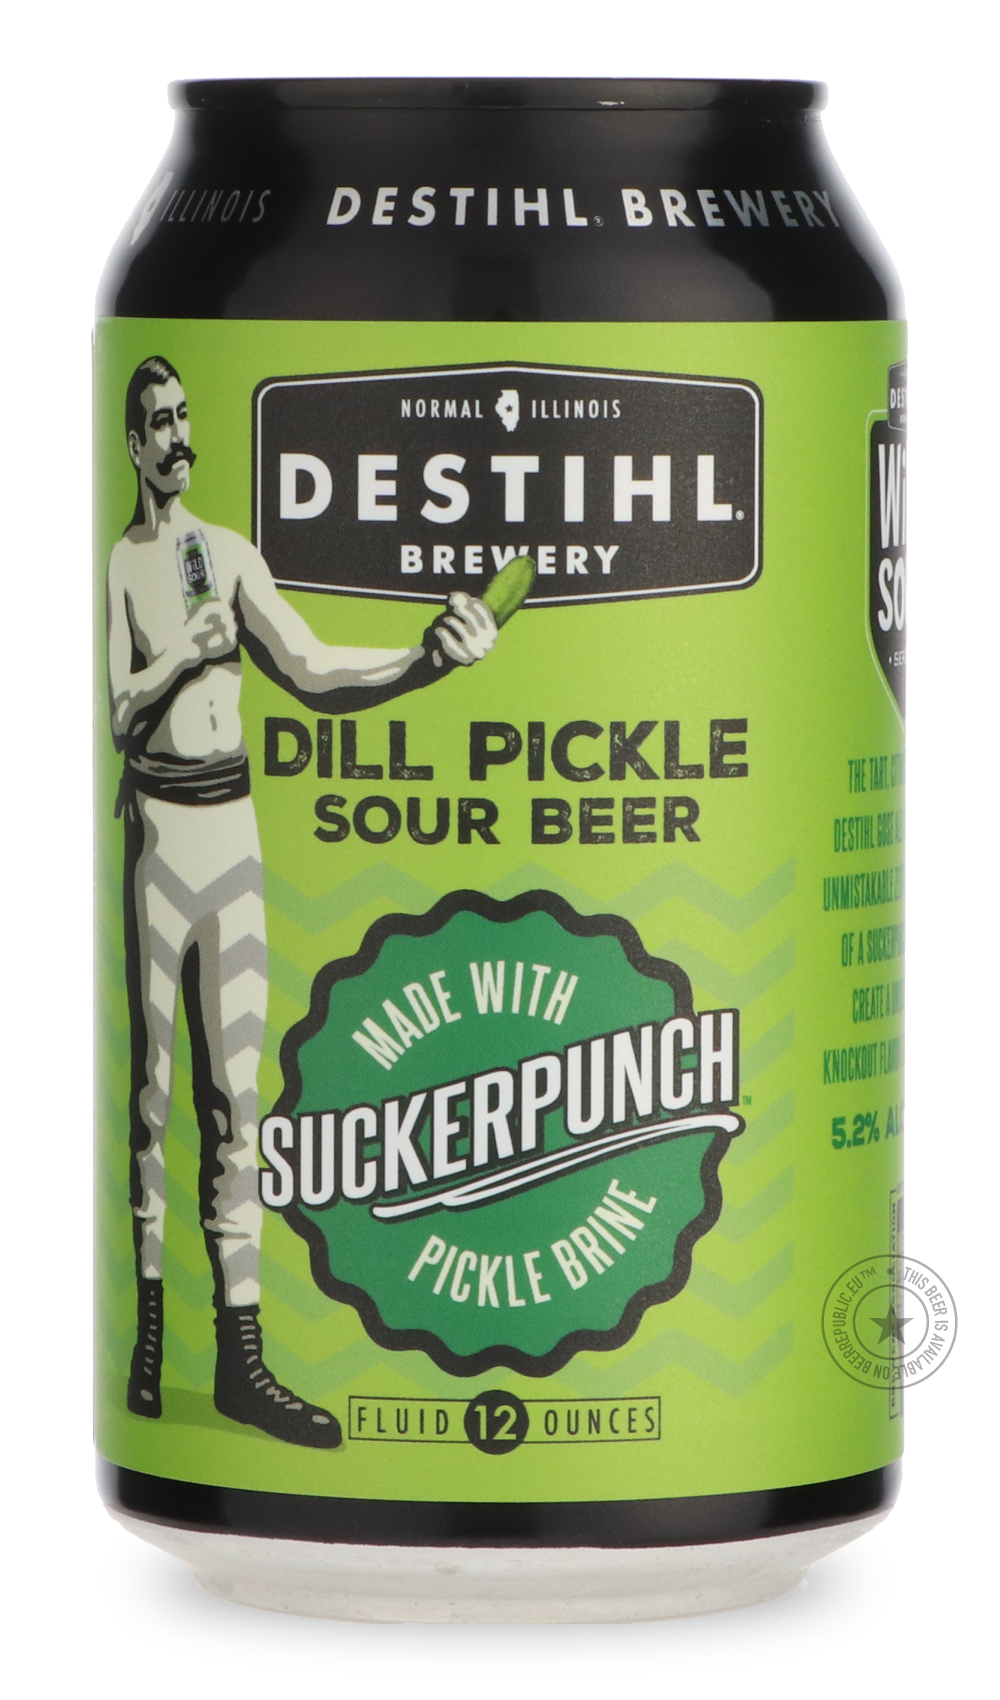 -Destihl- Dill Pickle Sour Beer - SuckerPunch-Sour / Wild & Fruity- Only @ Beer Republic - The best online beer store for American & Canadian craft beer - Buy beer online from the USA and Canada - Bier online kopen - Amerikaans bier kopen - Craft beer store - Craft beer kopen - Amerikanisch bier kaufen - Bier online kaufen - Acheter biere online - IPA - Stout - Porter - New England IPA - Hazy IPA - Imperial Stout - Barrel Aged - Barrel Aged Imperial Stout - Brown - Dark beer - Blond - Blonde - Pilsner - Lag